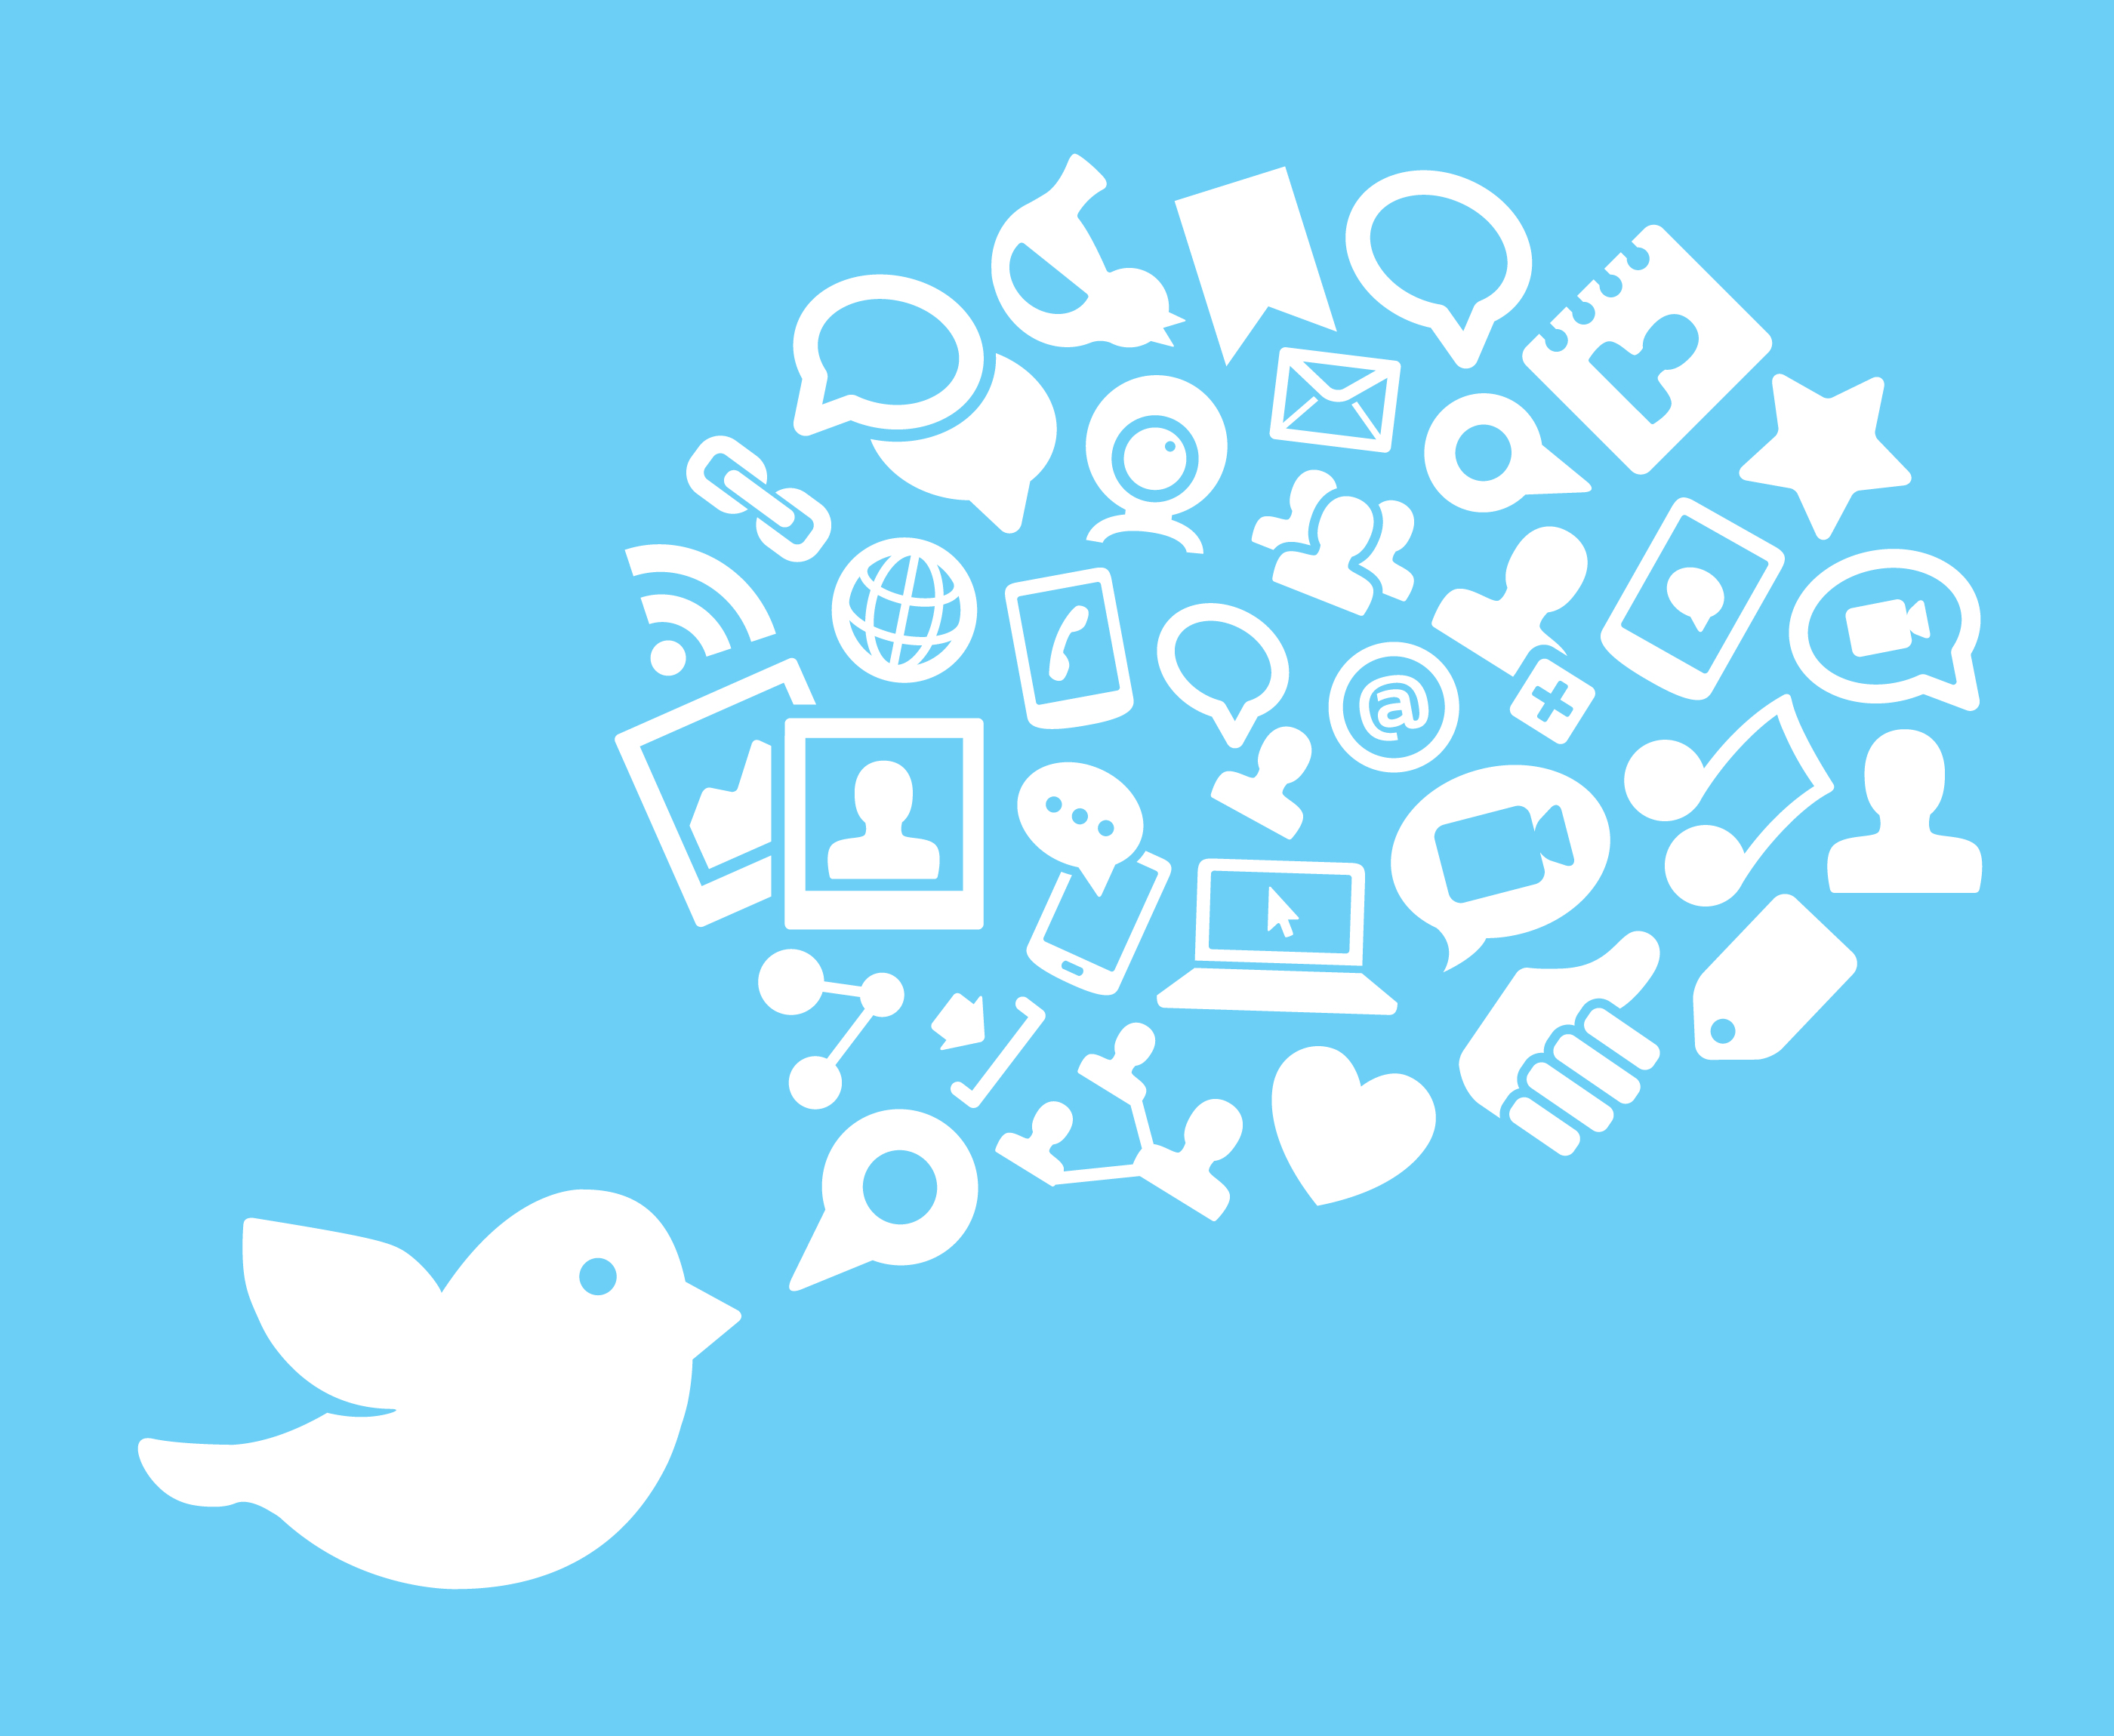 6 Key Tips for Becoming a Twitter Master